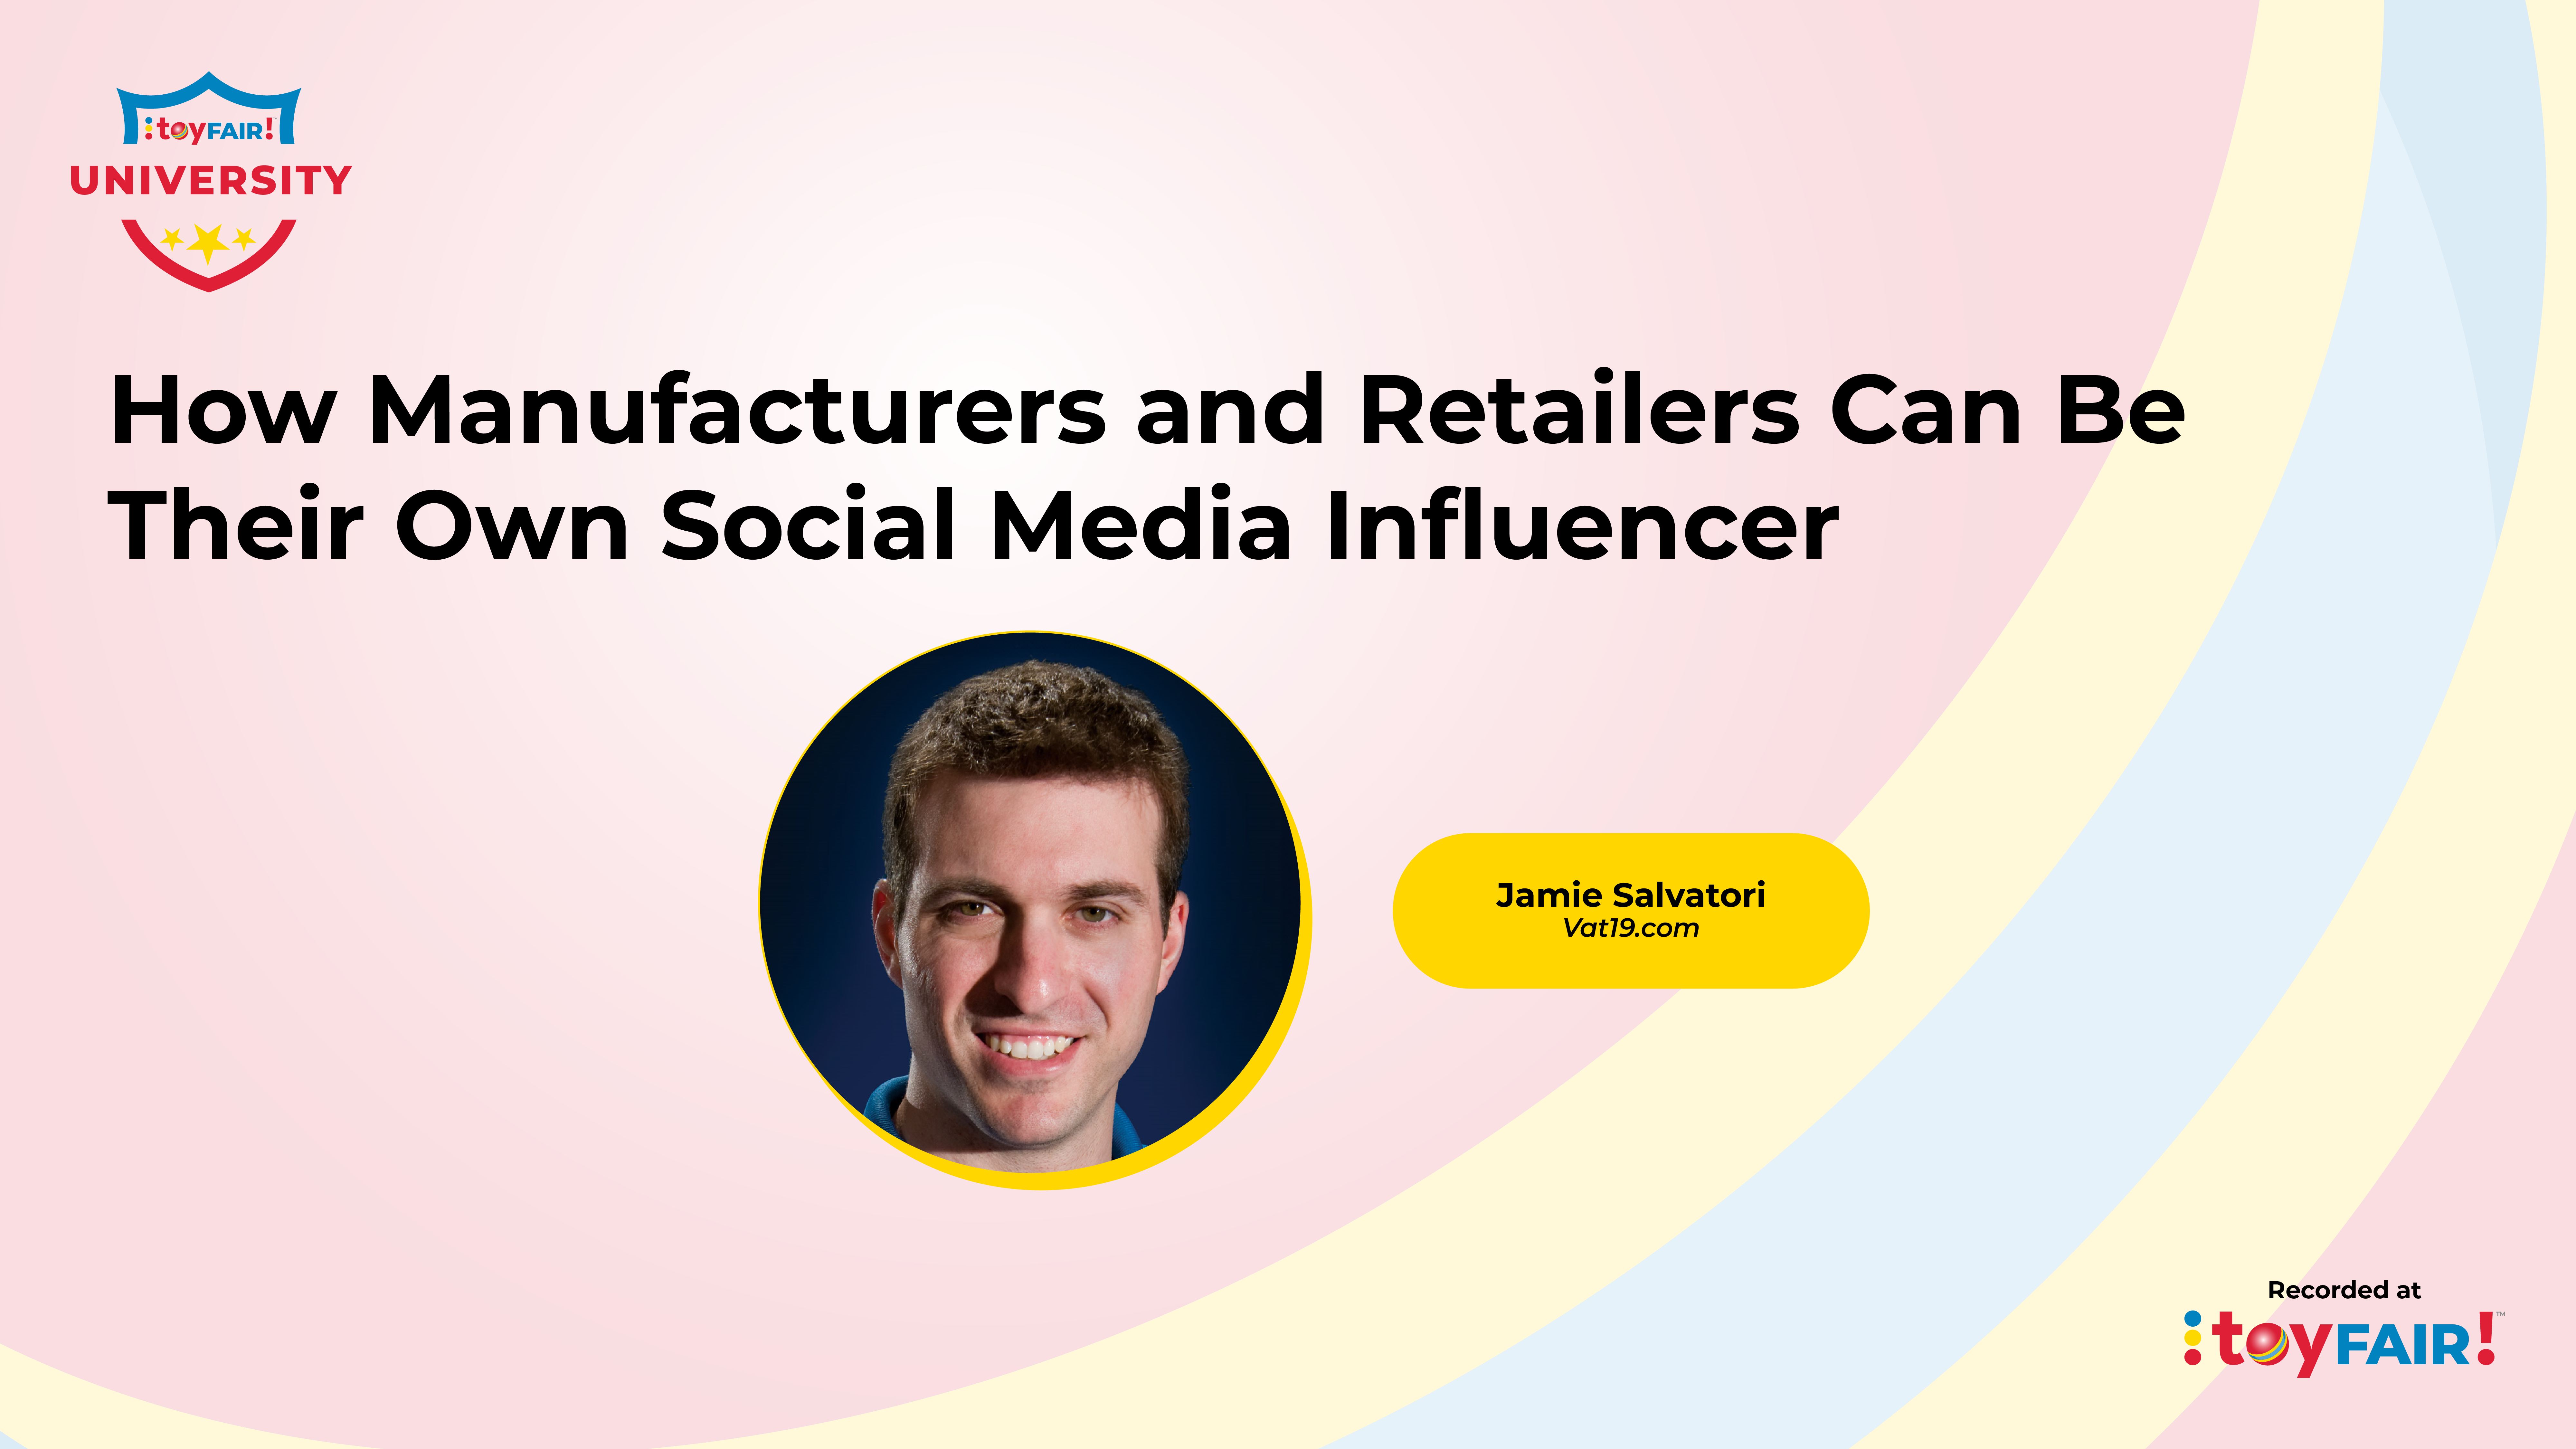 How Manufacturers and Retailers Can Be Their Own Social Media Influencer